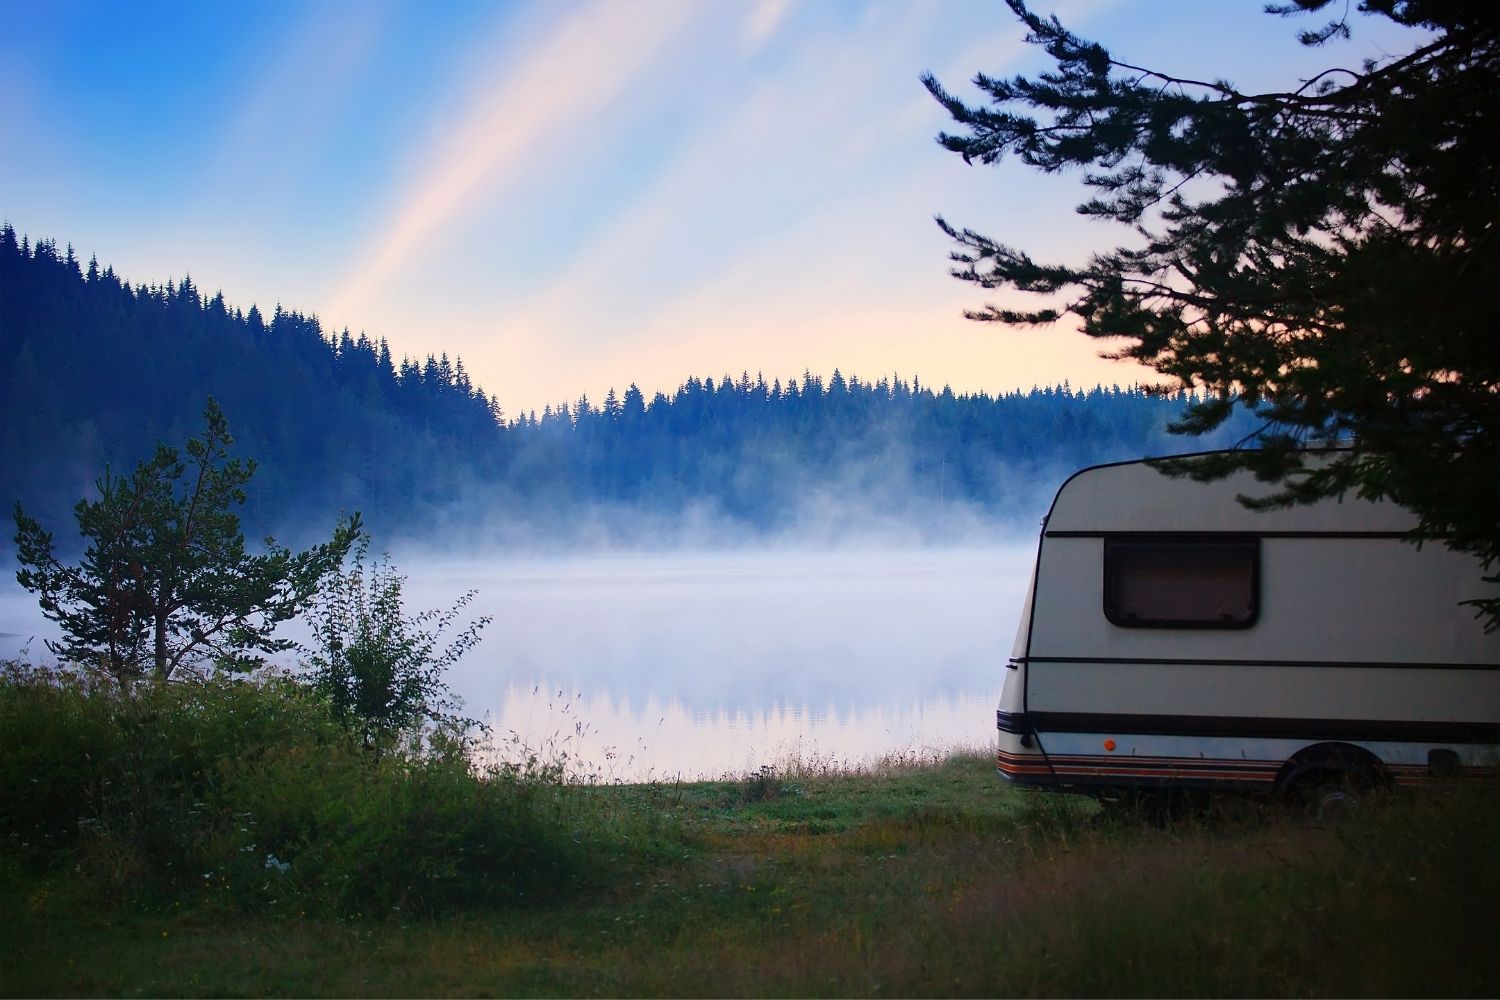 Here’s How to Plan an Epic RV Vacation in Alaska